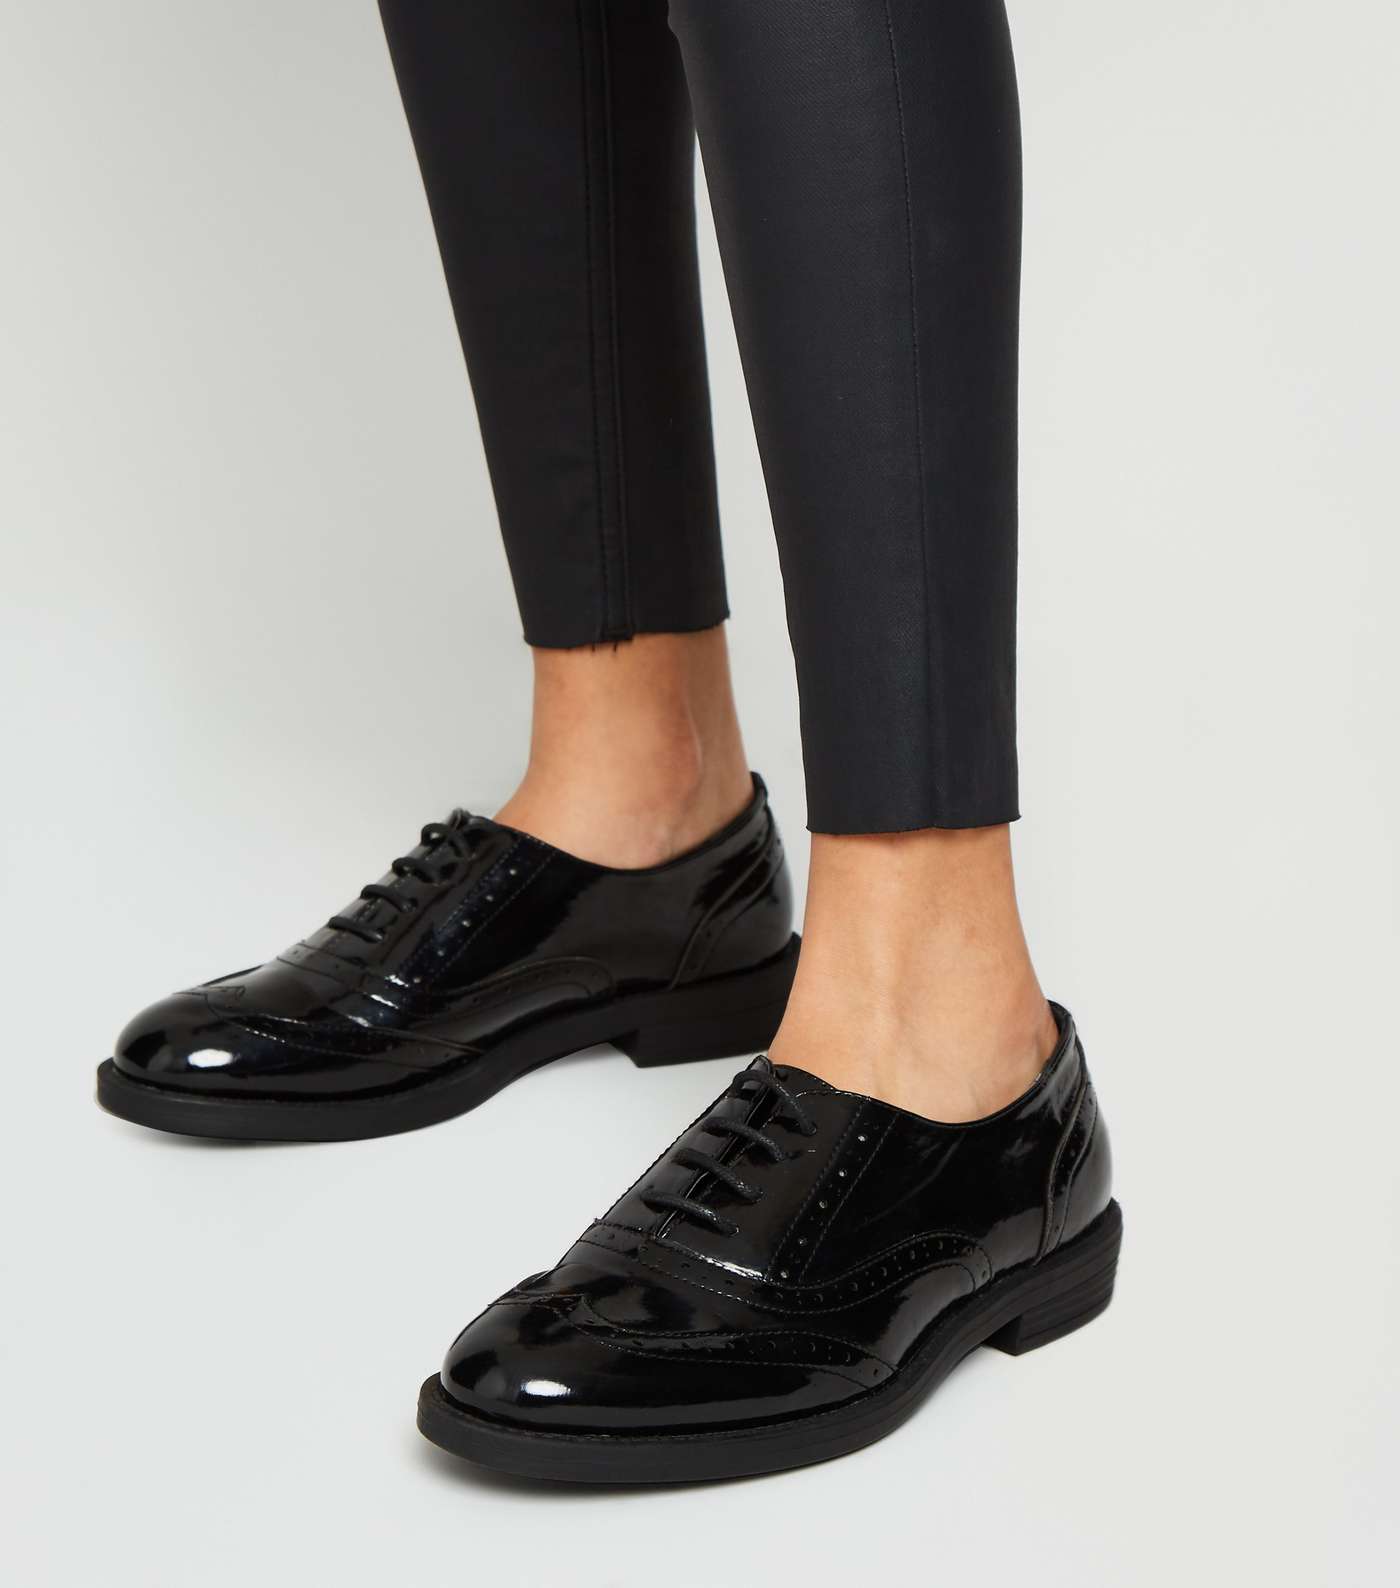 Girls Black Patent Lace-Up Brogues Image 2